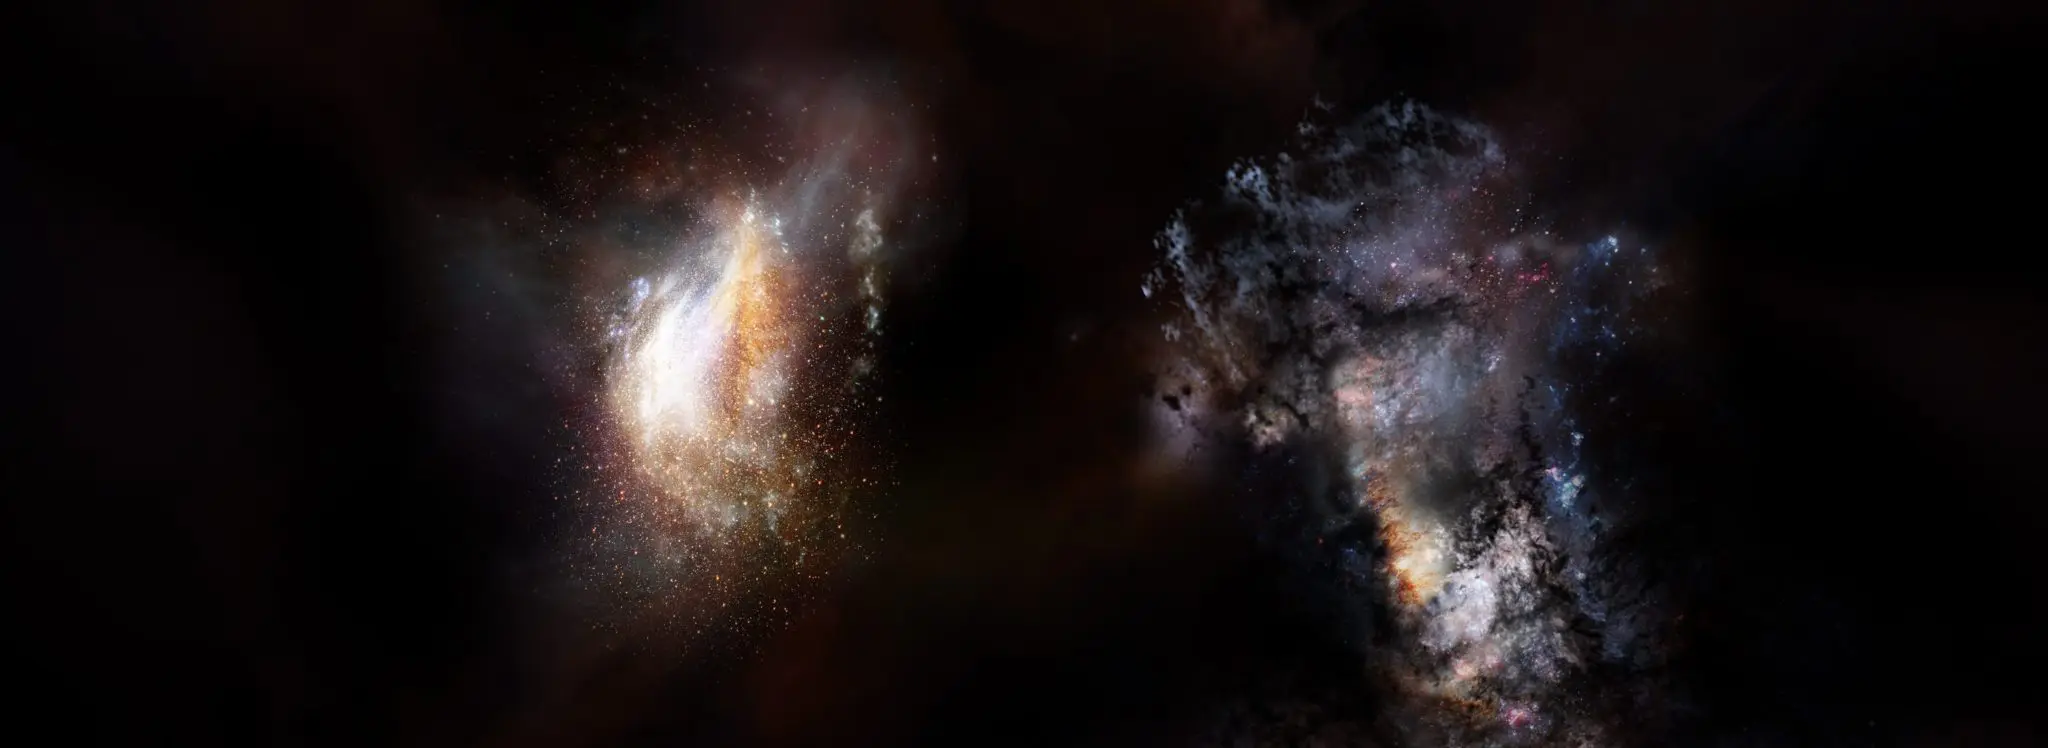 Massive galaxies found in early Universe 